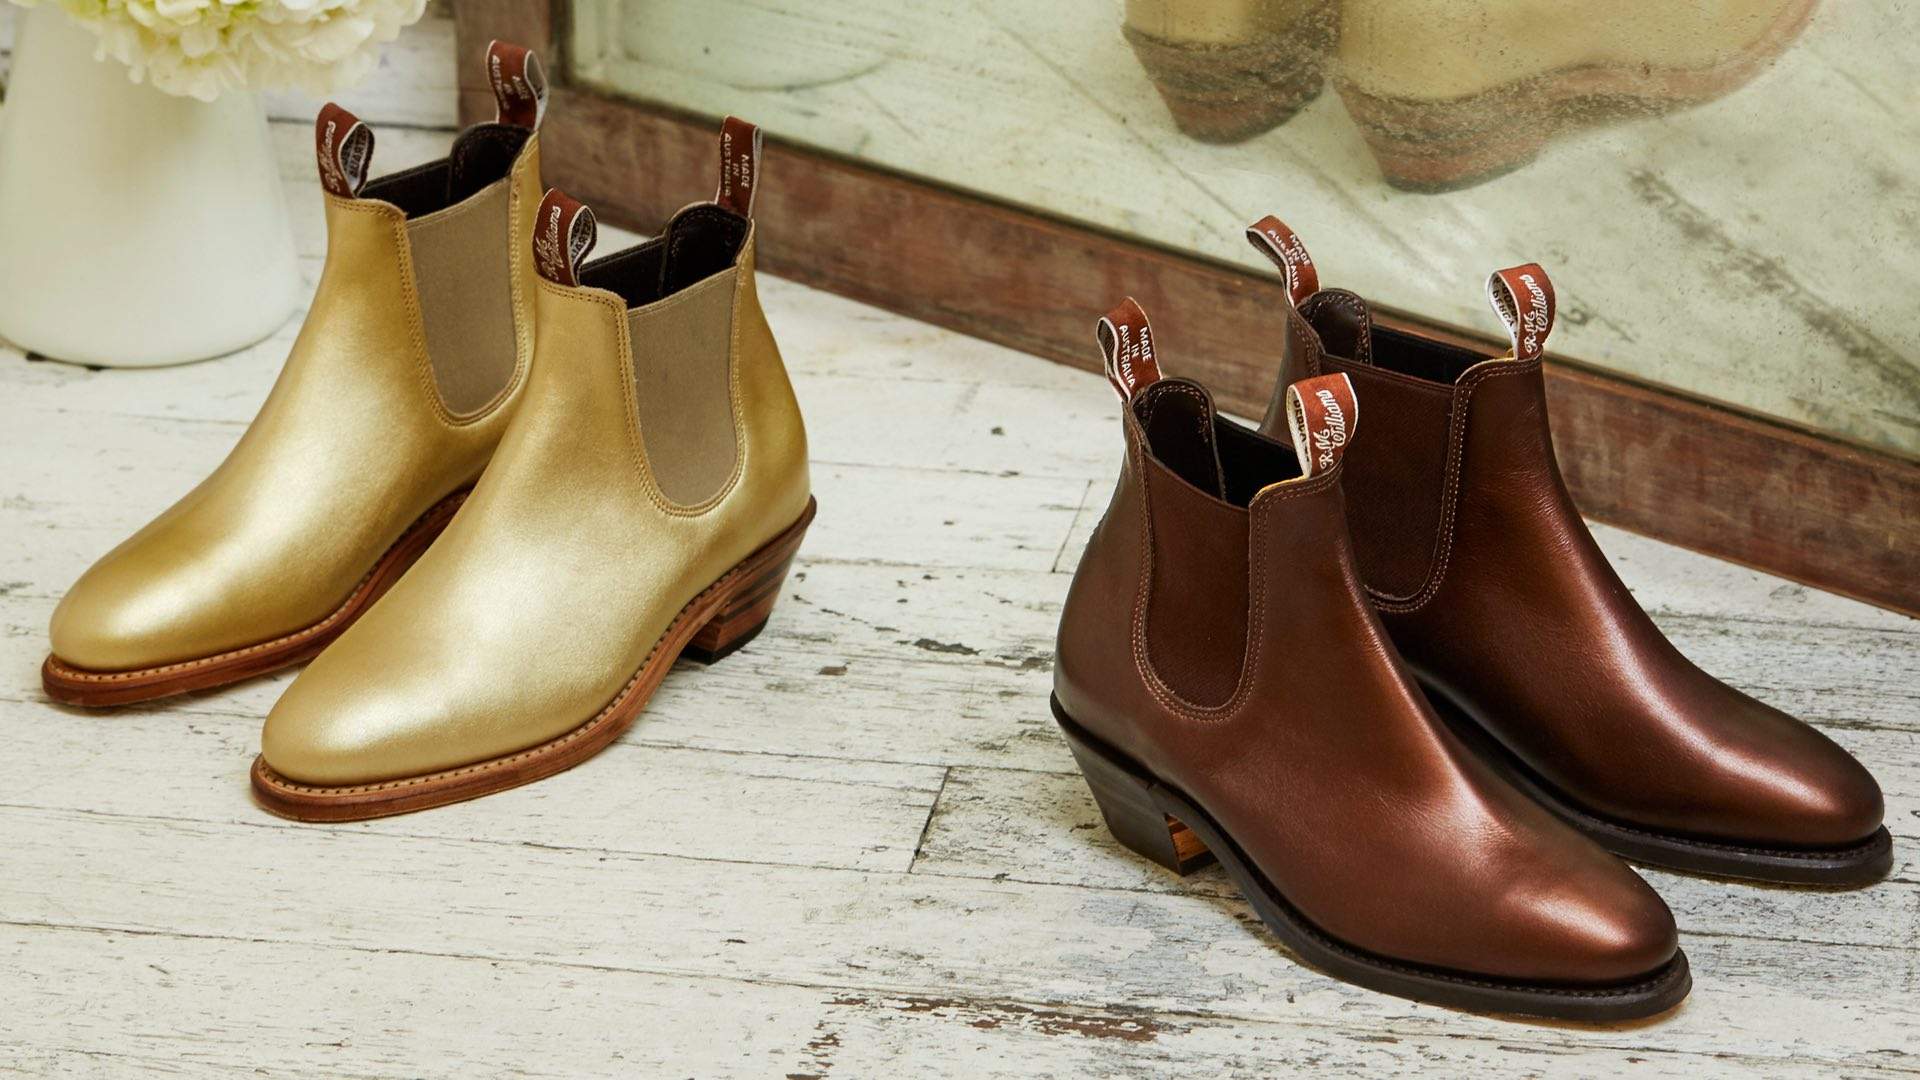 R.M. Williams Is Releasing a Second Run of Its Gold Metallic Boots